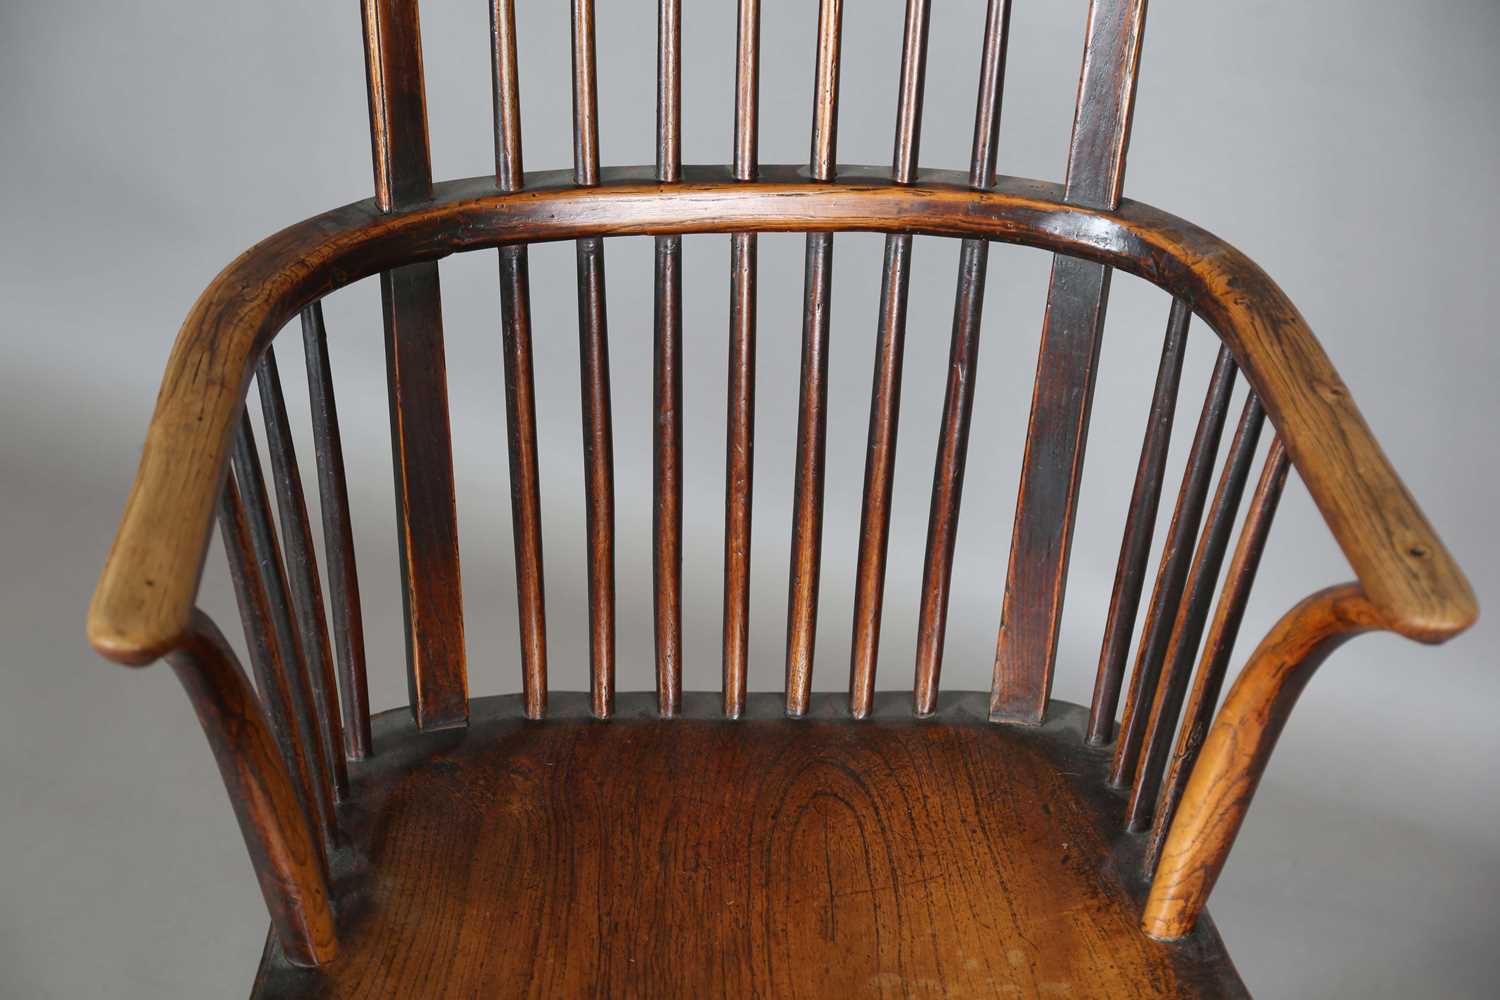 A mid-19th century provincial ash and elm bar and stick back Windsor armchair with a wide elm seat - Image 3 of 9